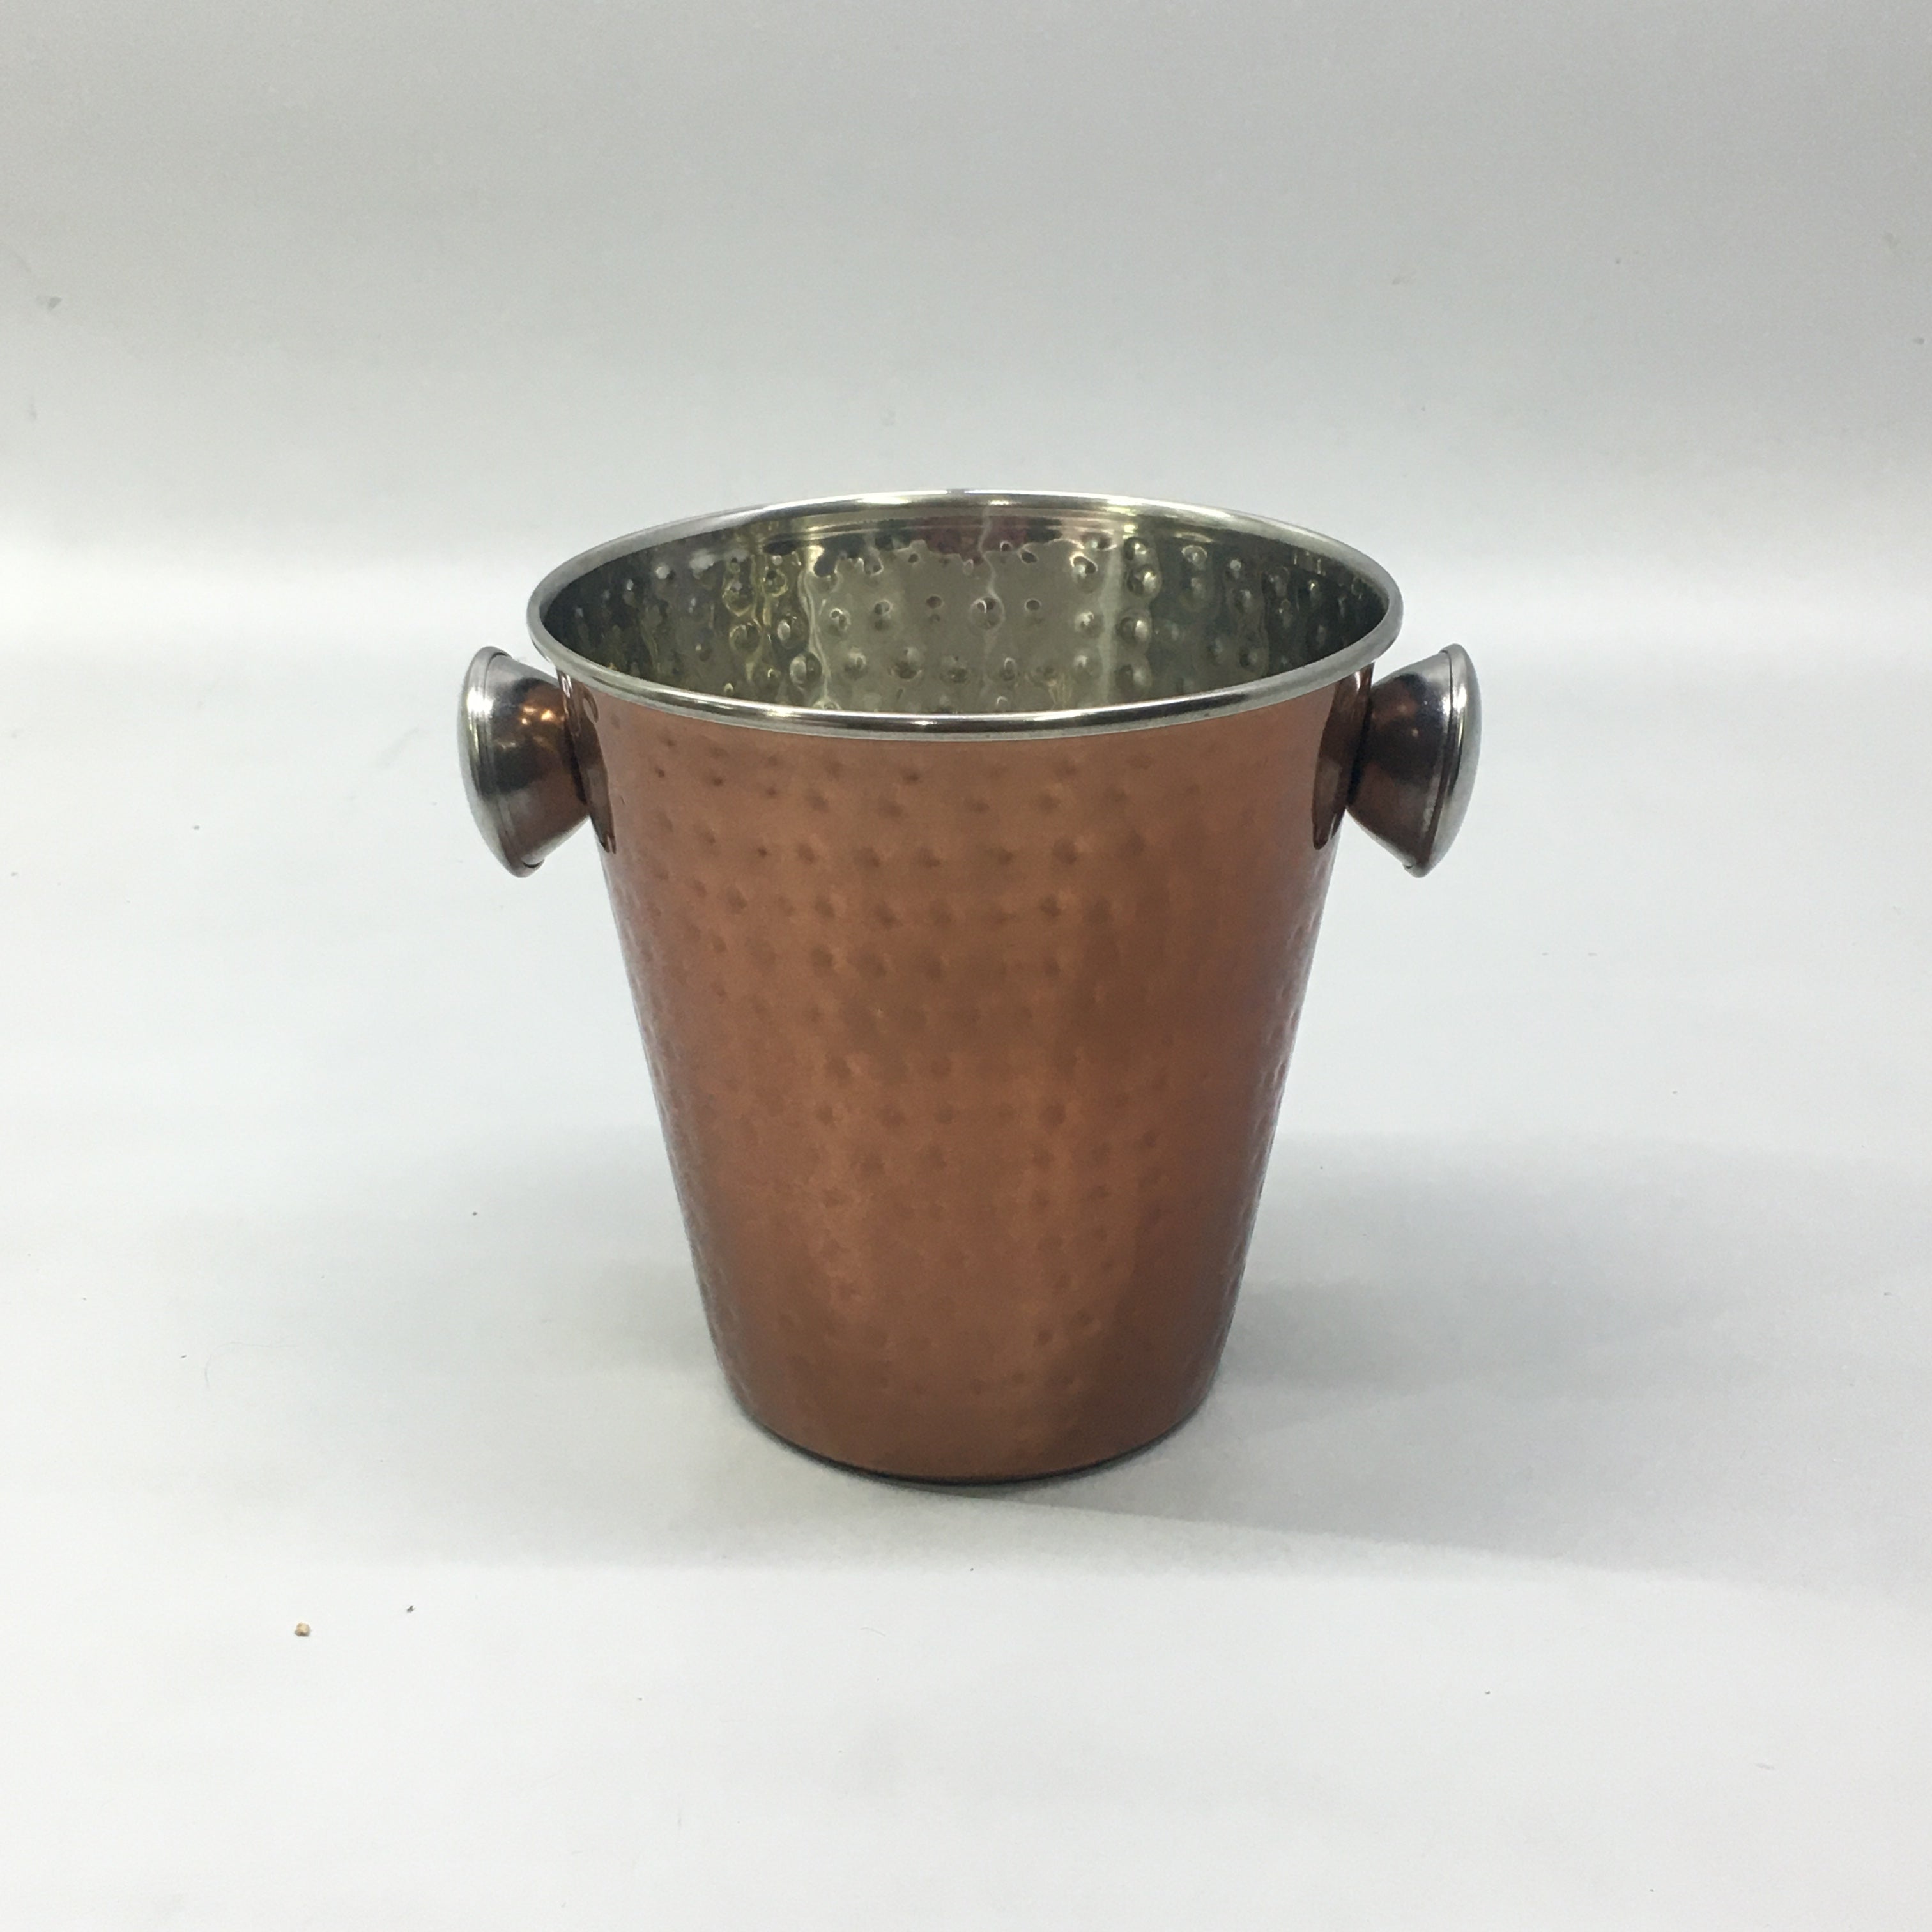 Ice Bucket Copper Finish Hammered 21x21cm Stainless Steel with Knob Handle